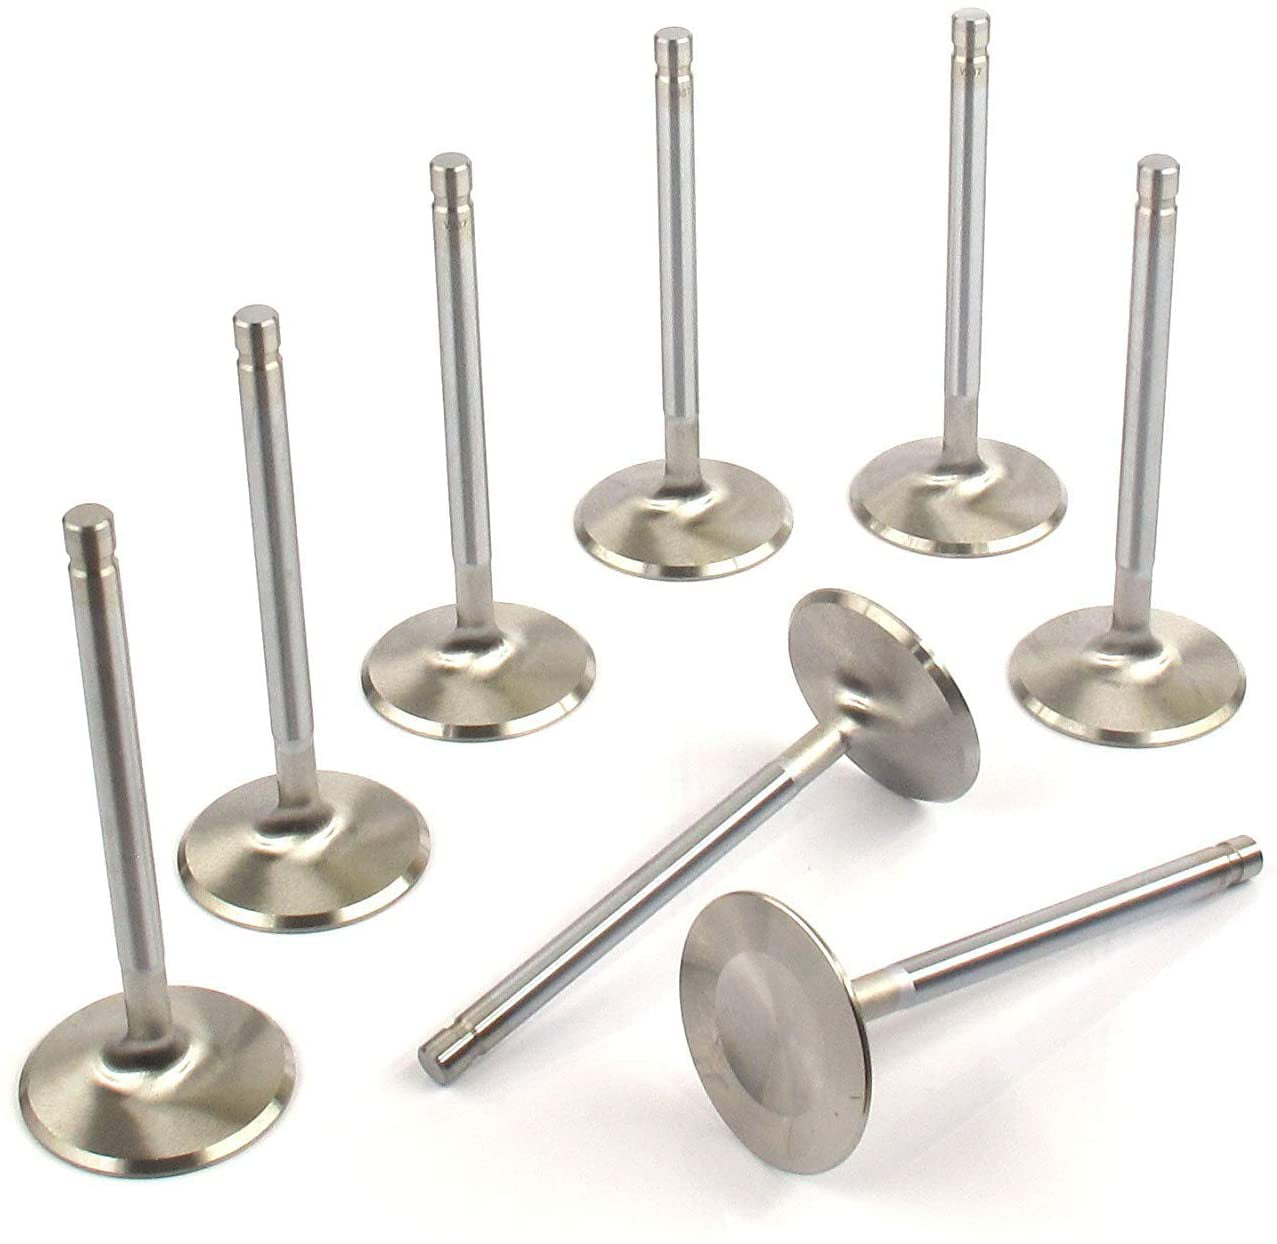 Elgin Stainless Intake Valves Set of 8 2.02 head & Set of 8 1.60 Head Diameters compatible with Chevy 283 327 305 350 